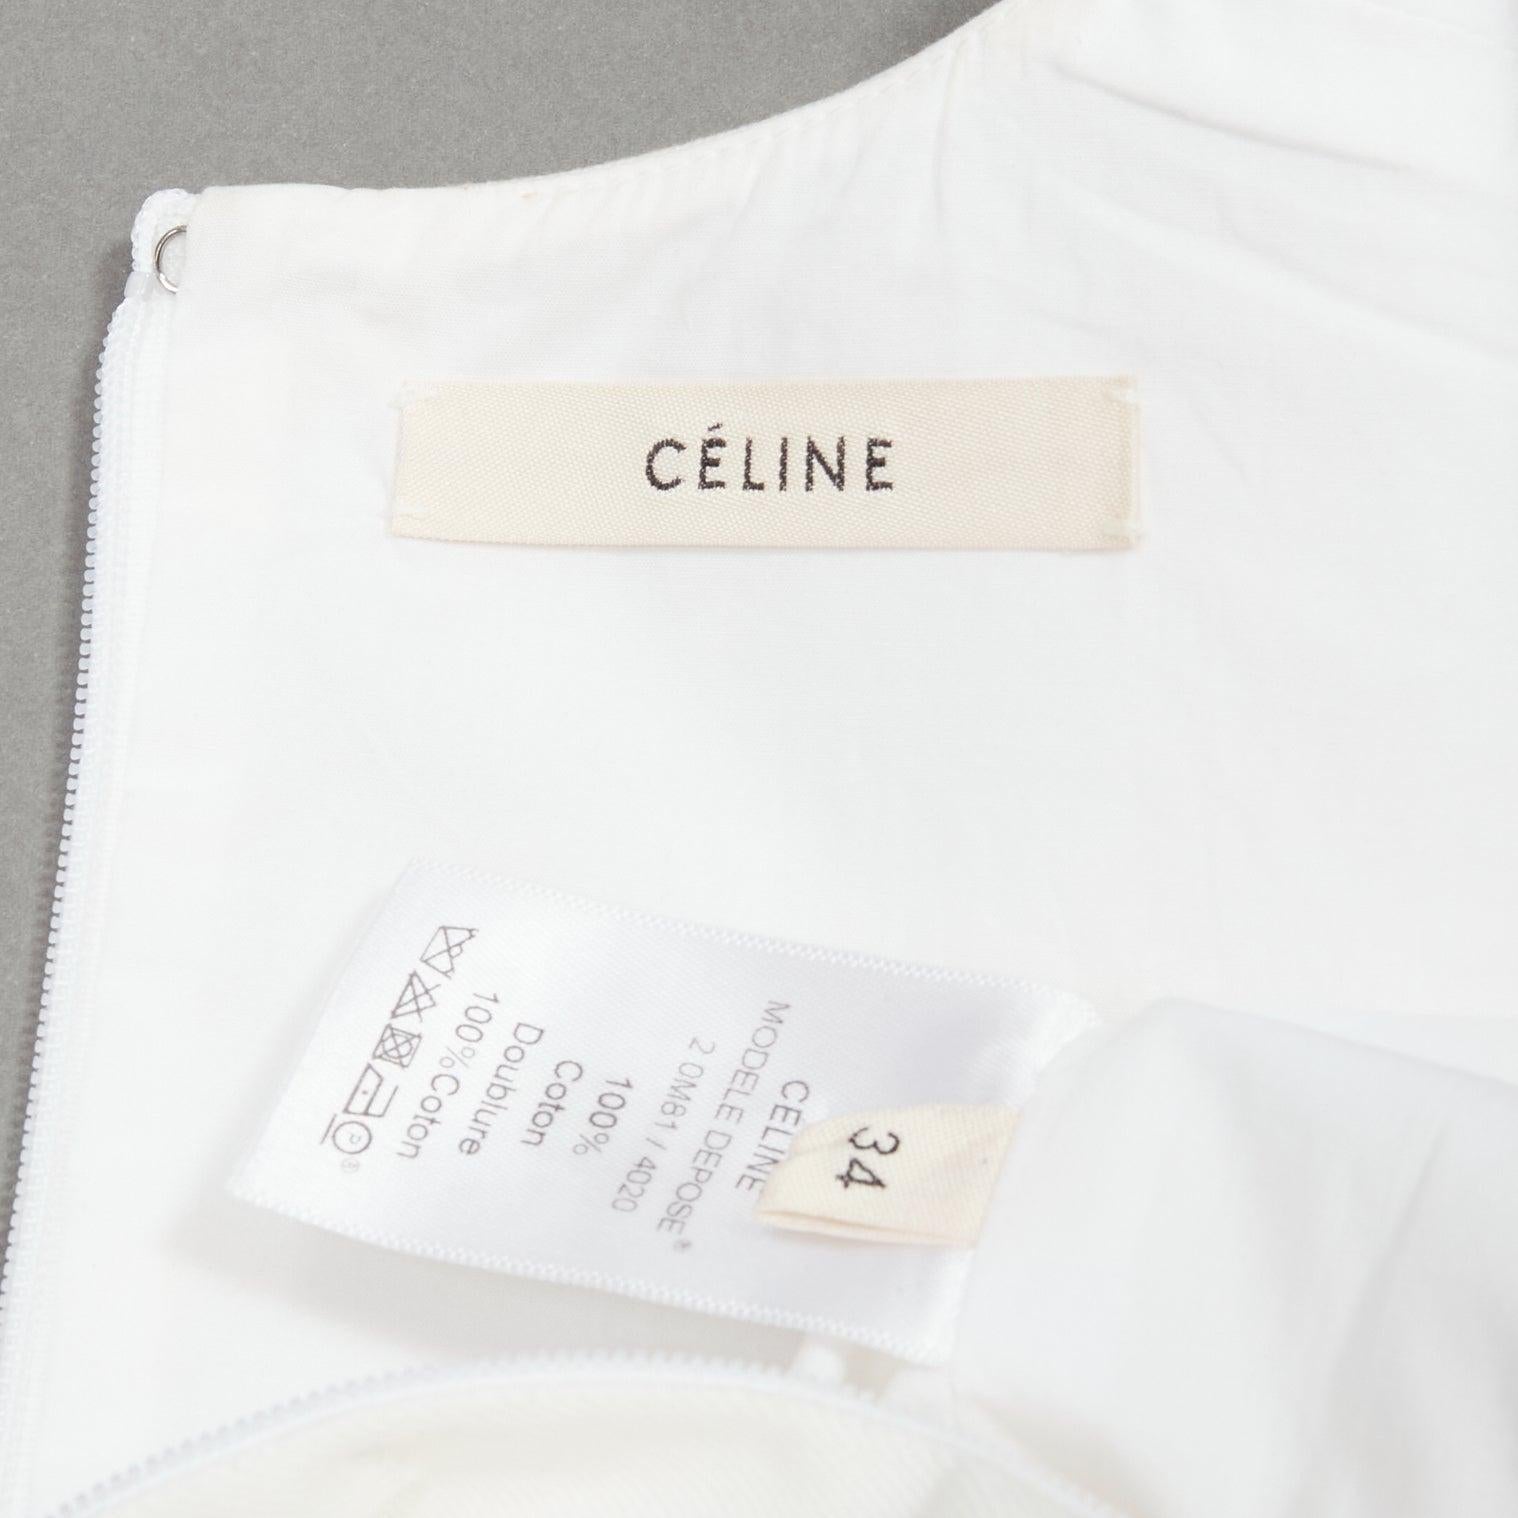 OLD CELINE Phoebe Philo 2012 white cotton peplum sleeveless fitted top FR34 XS For Sale 2